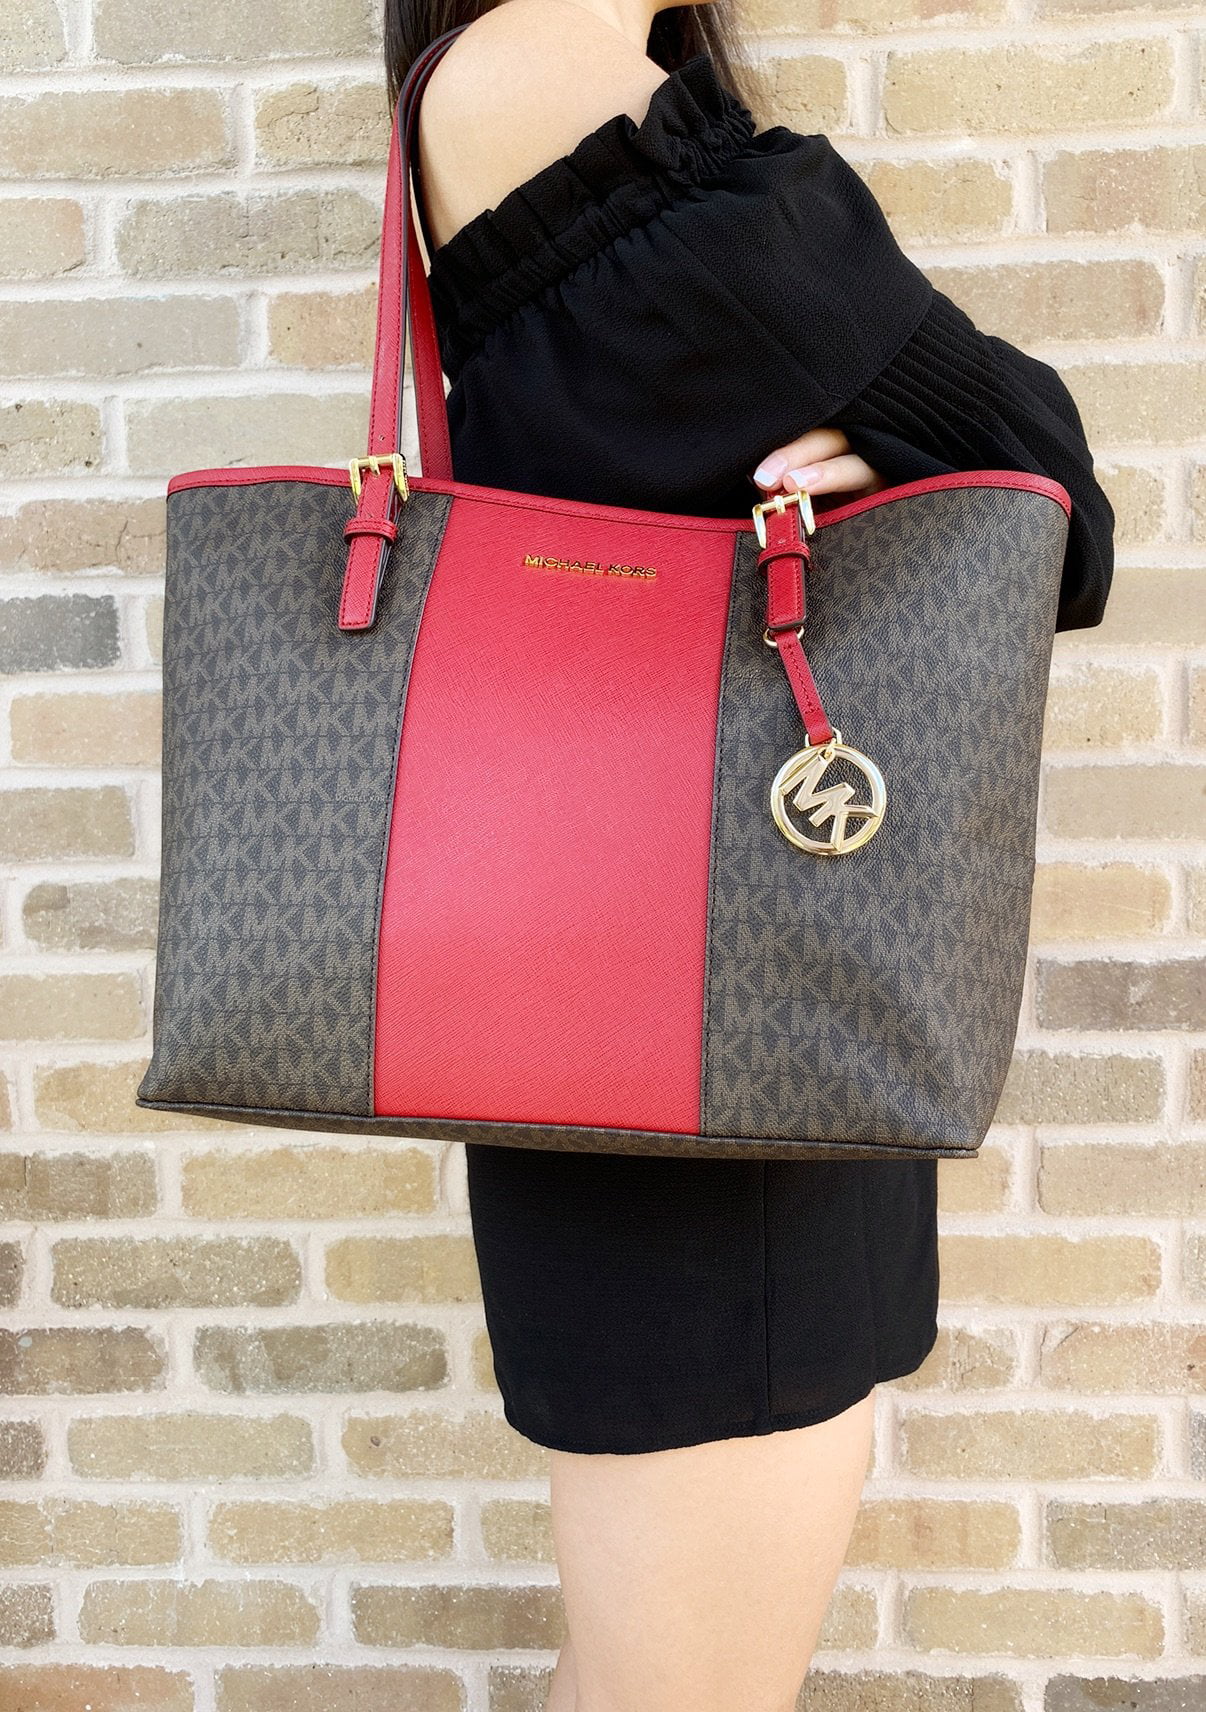 red mk tote